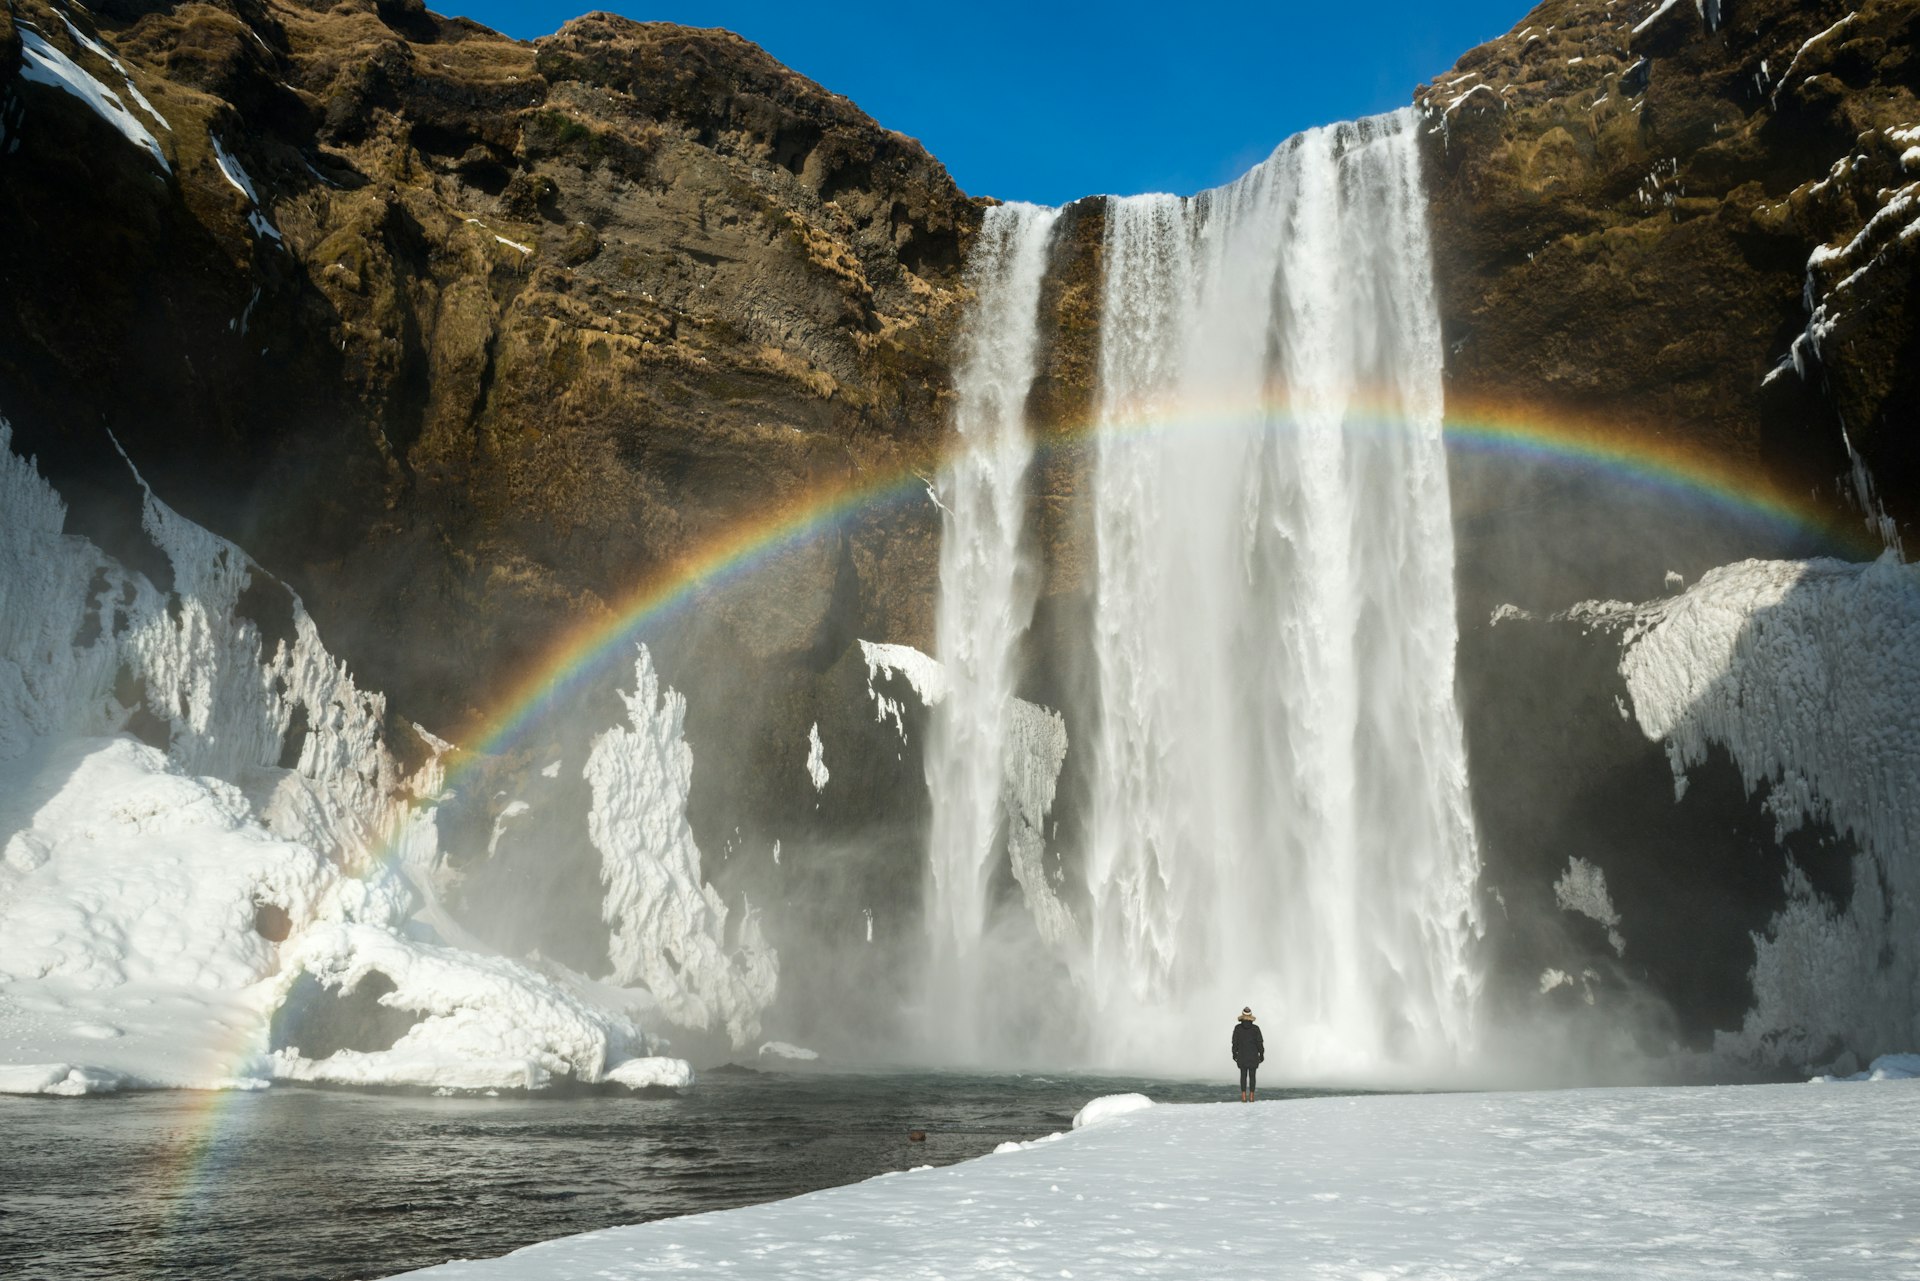 A tourist standing in front of Skogafoss waterfall with rainbow across it, Iceland